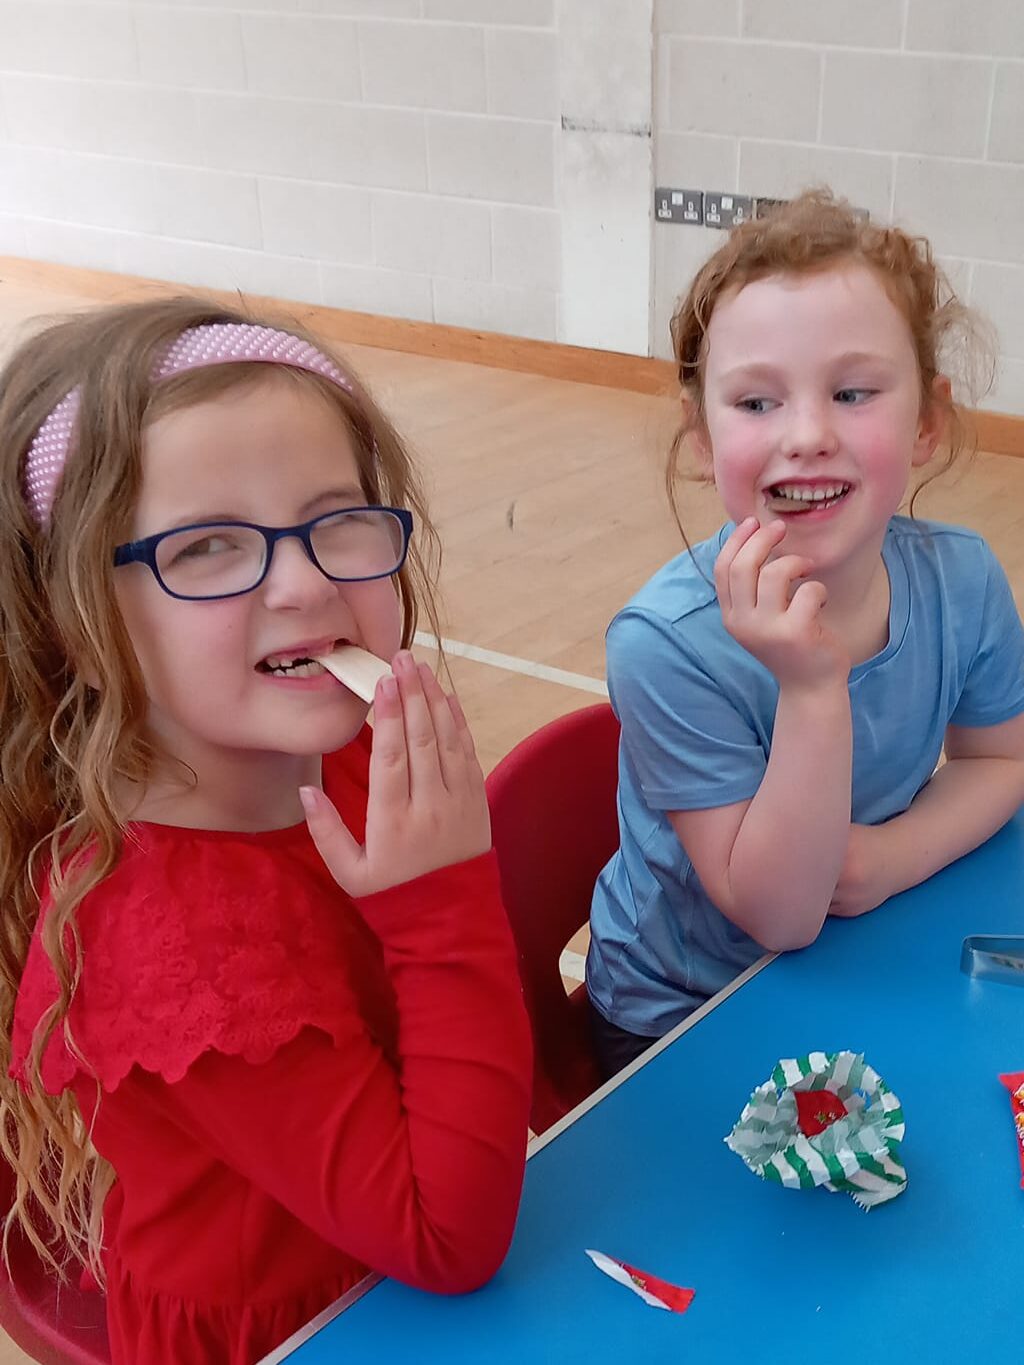 This image shows two girls helping themselves at the pick and mix sweet table at the Angel Eyes Musical Tots Family Day